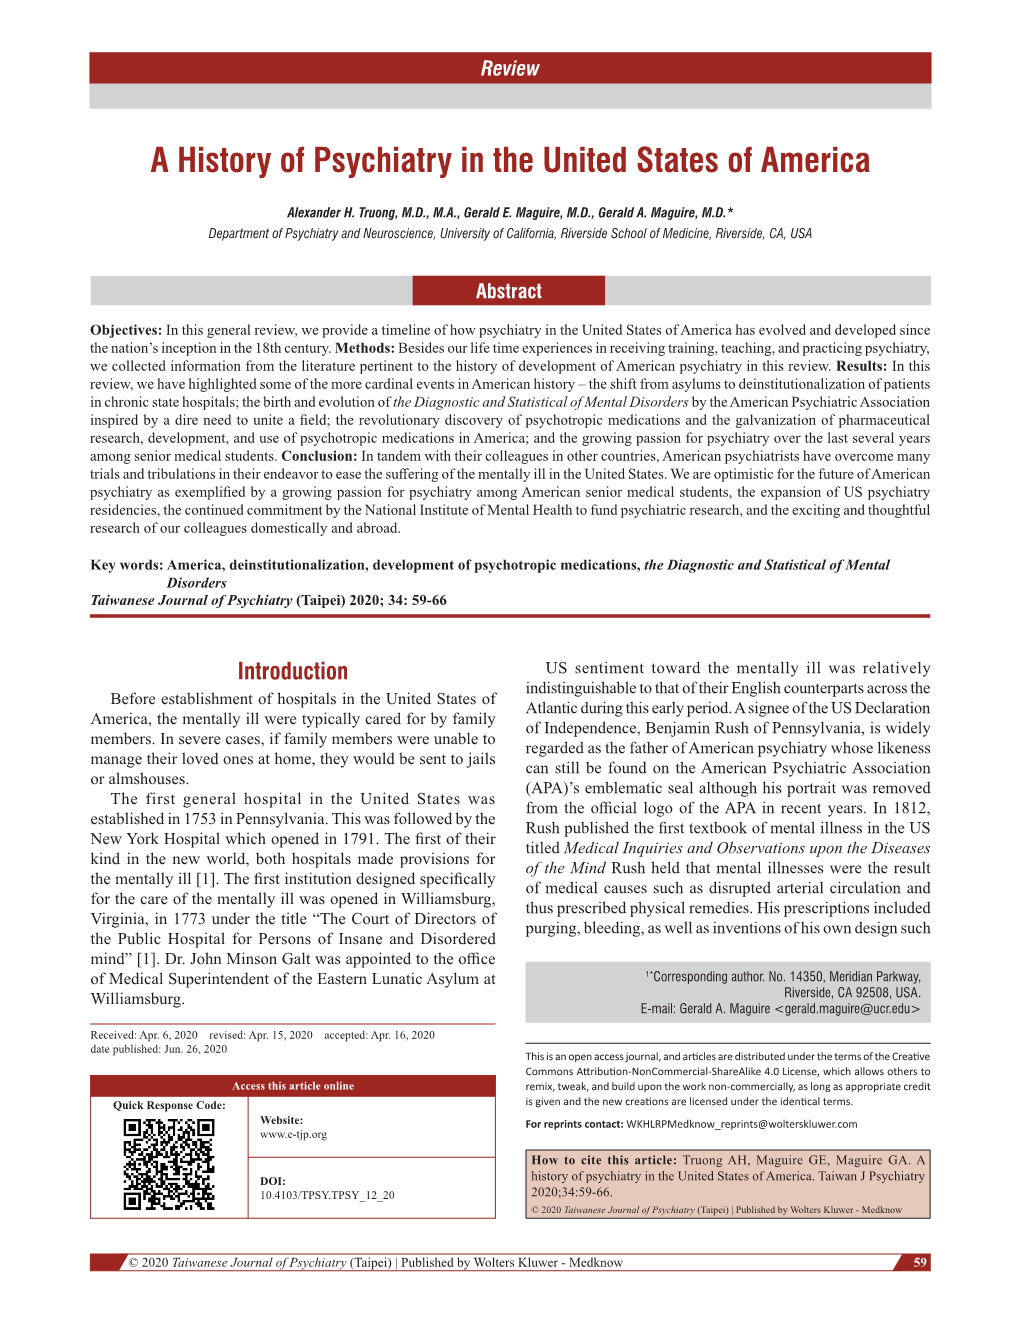 A History of Psychiatry in the United States of America